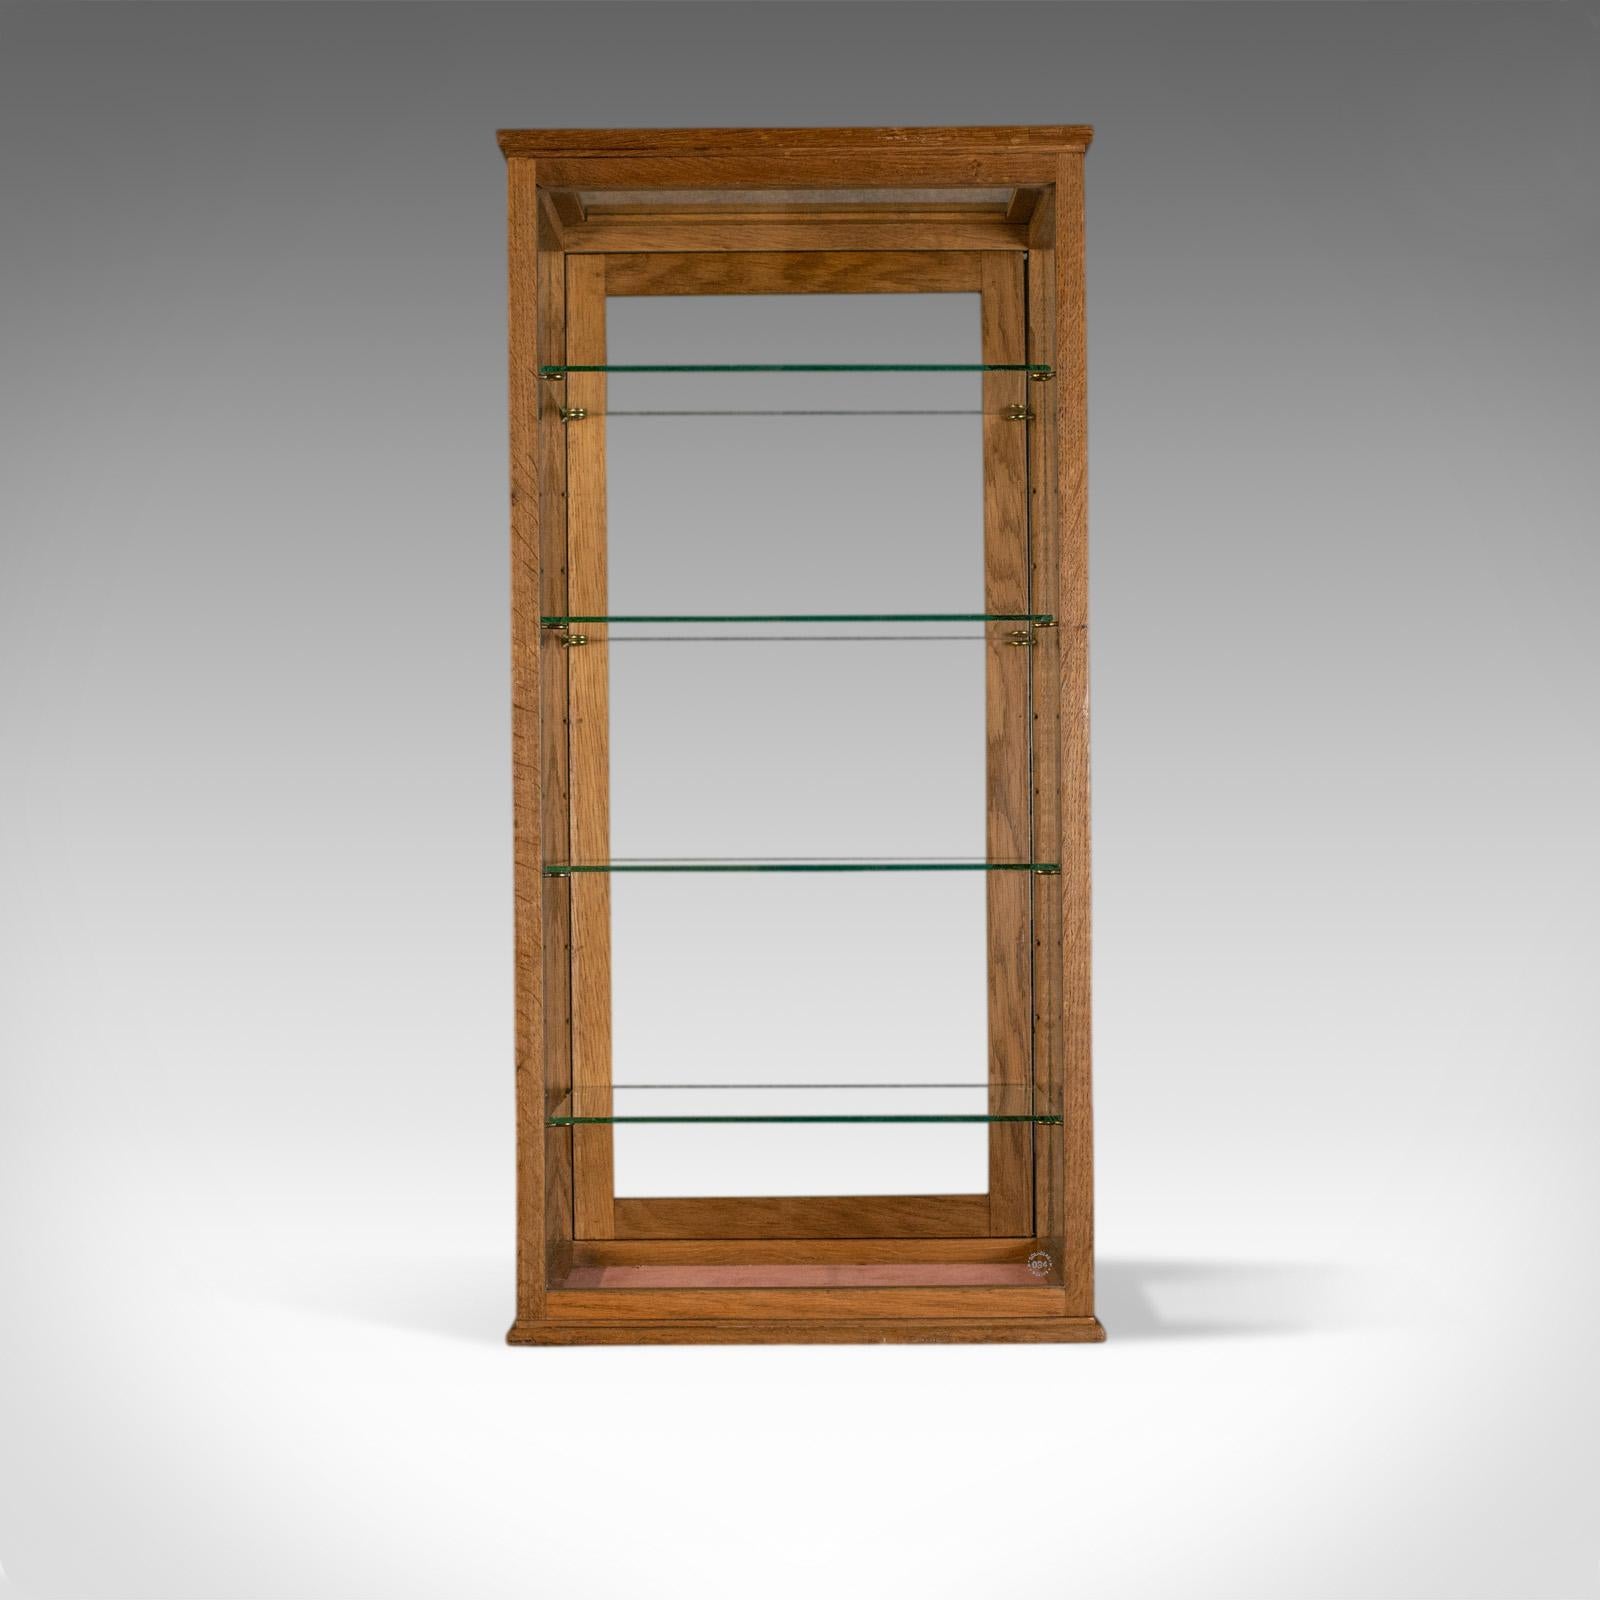 This is an antique counter display cabinet with four glass shelves. An English, late 19th century oak cabinet, circa 1900.

Crafted from oak and displaying plentiful grain interest
A desirable aged patina present throughout
Plate glass in good